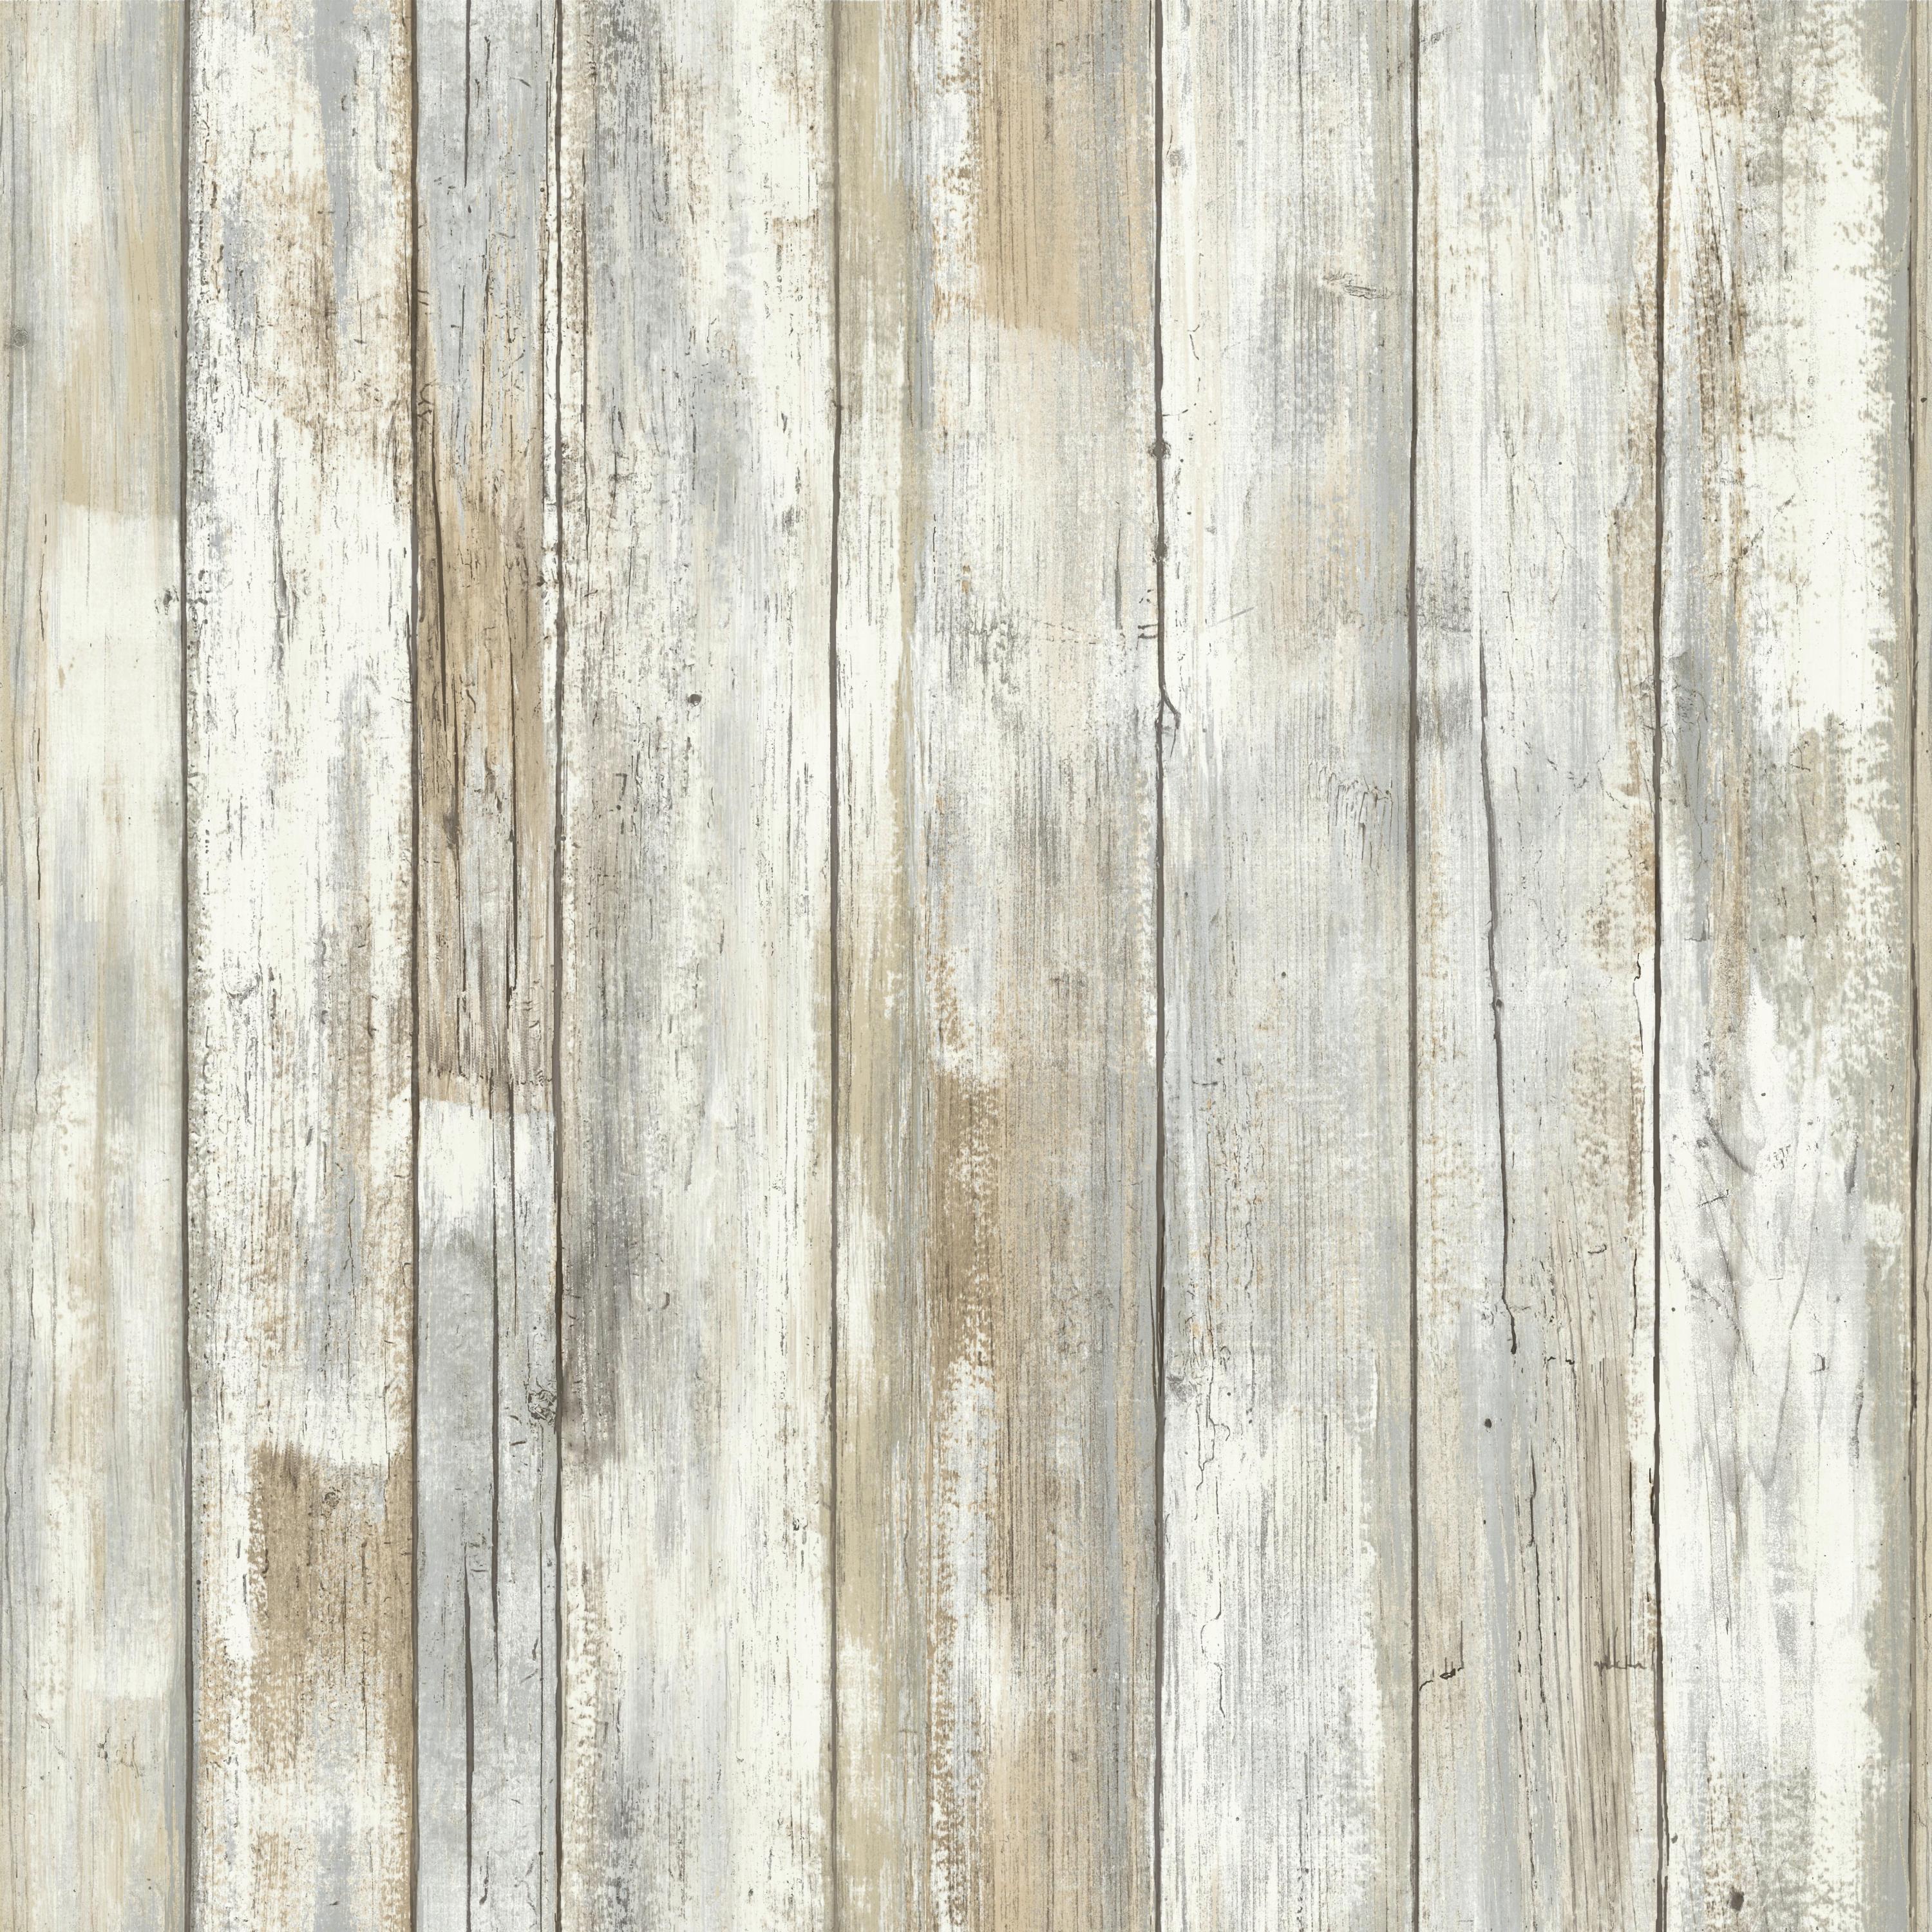 RoomMates Distressed Wood Peel and Stick Wall Decor Wallpaper